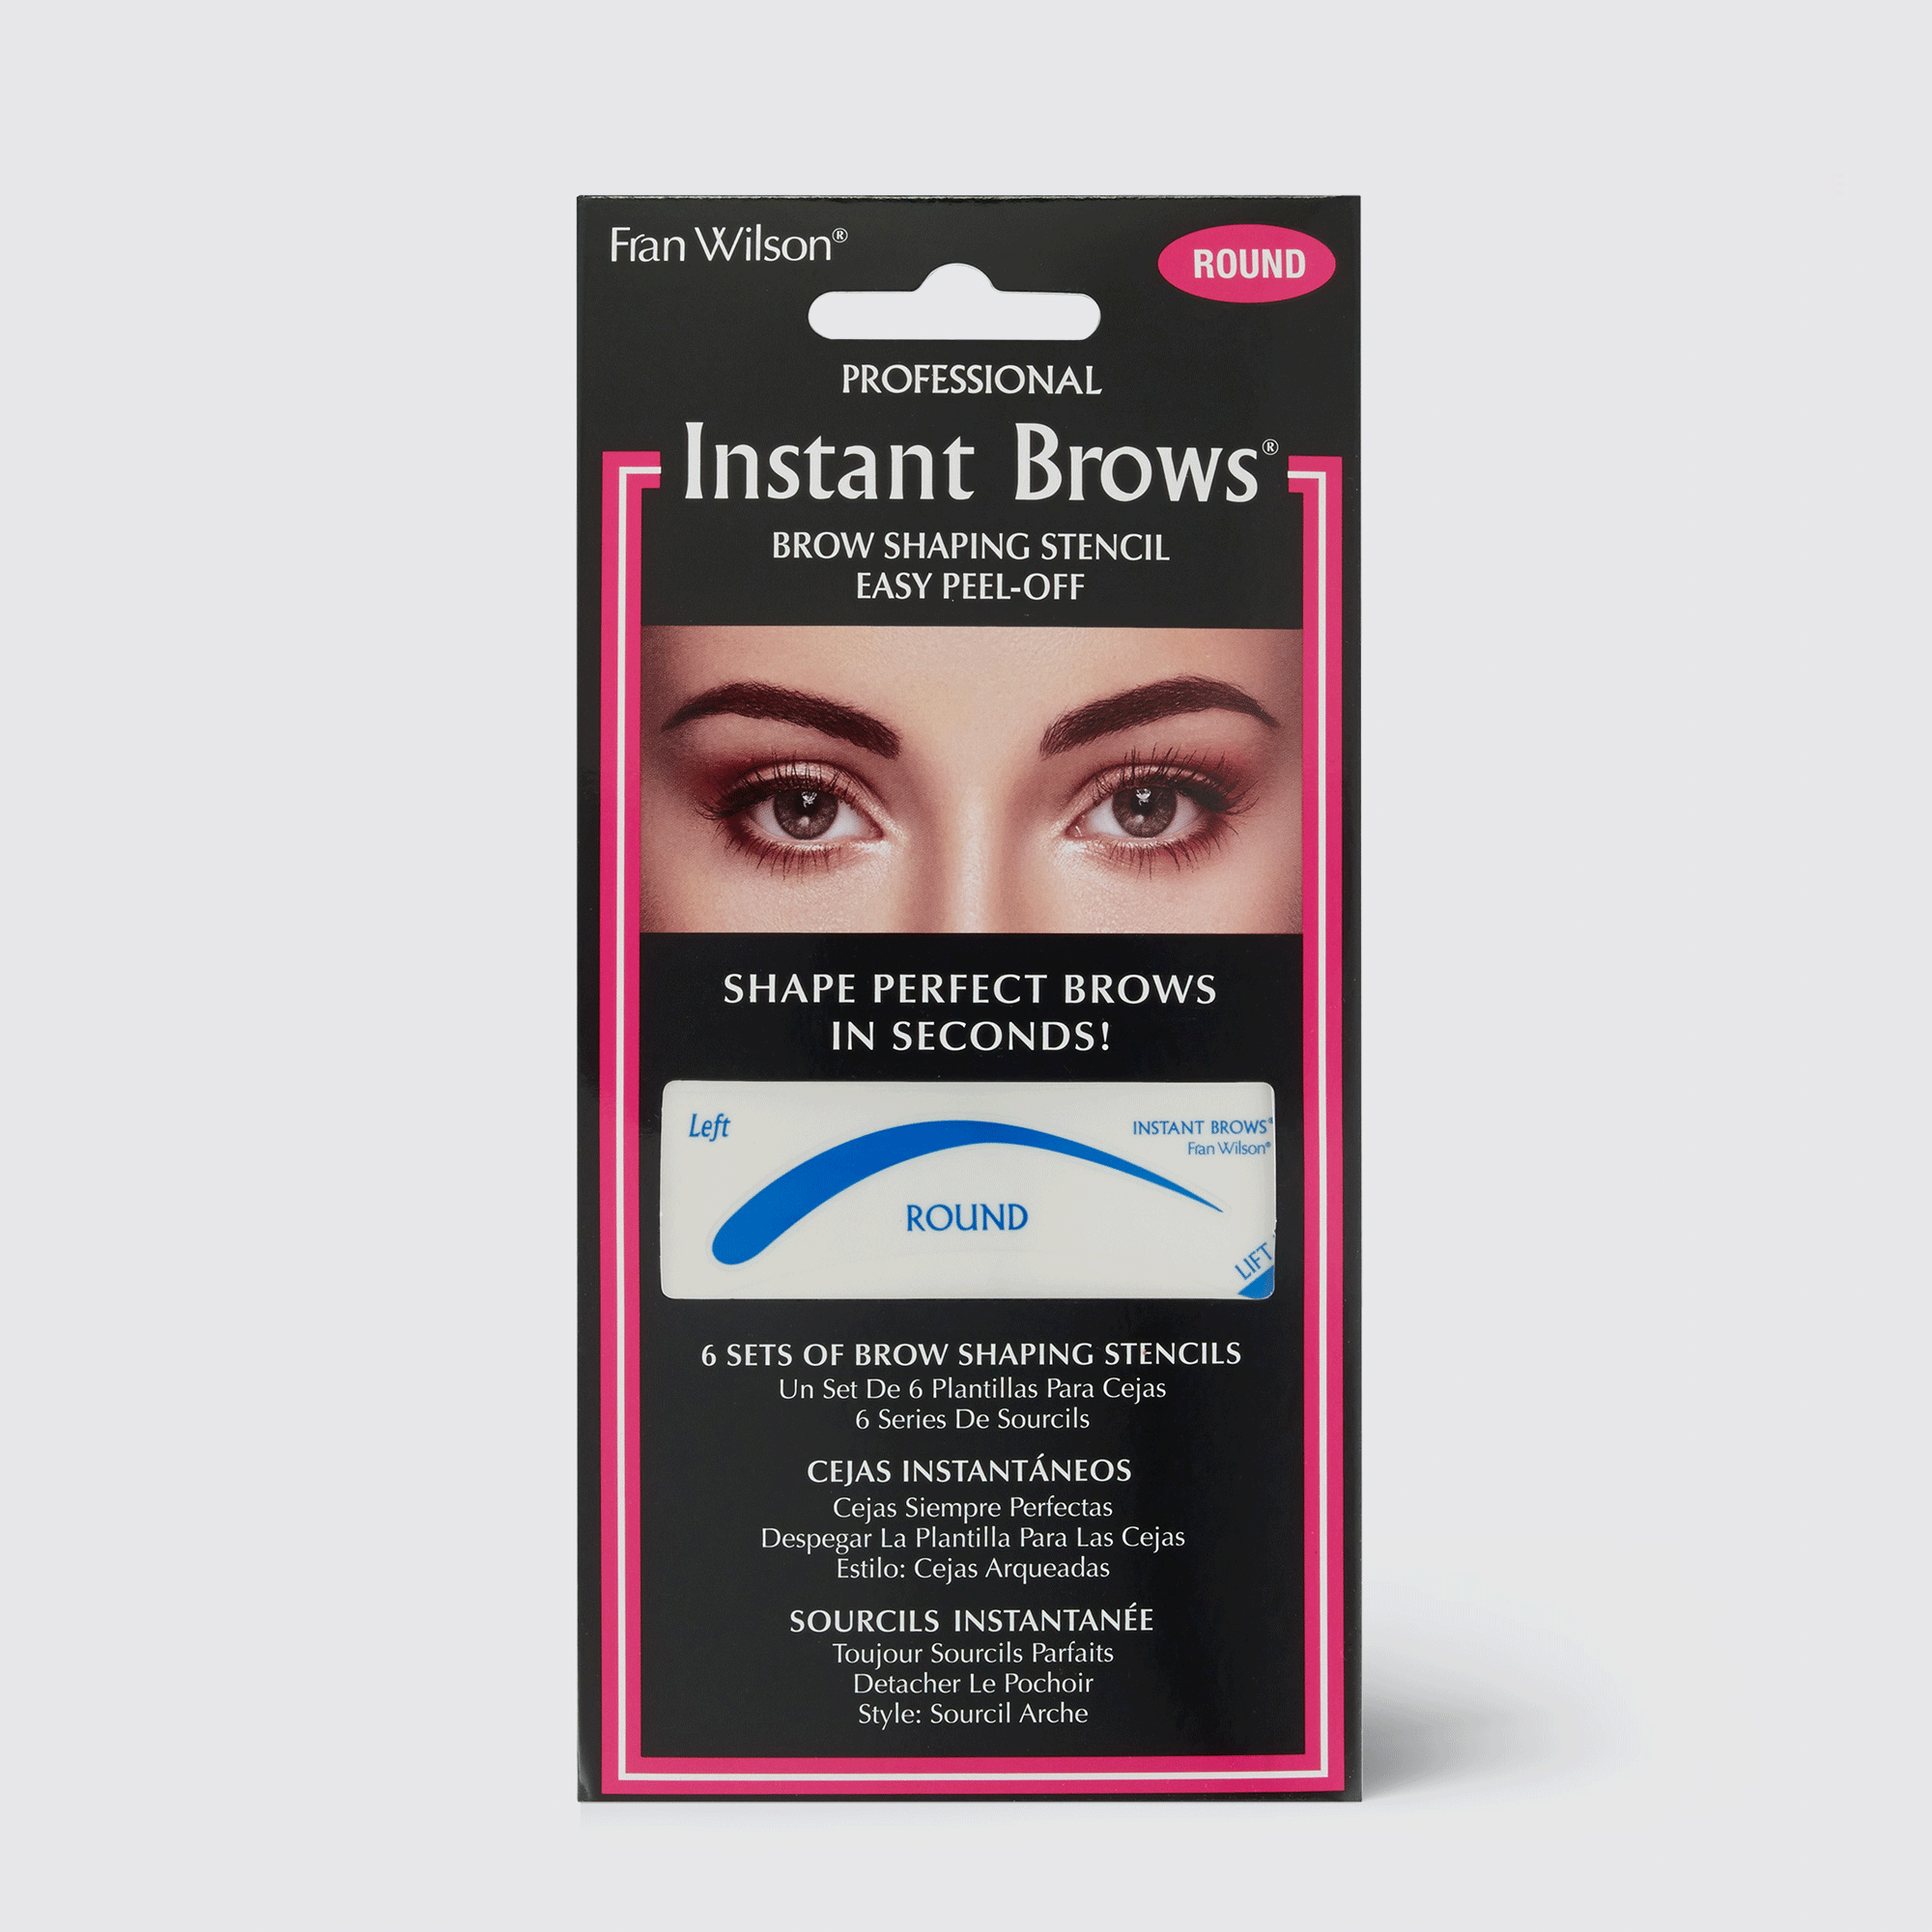 Instant Brows Round - FranWilson